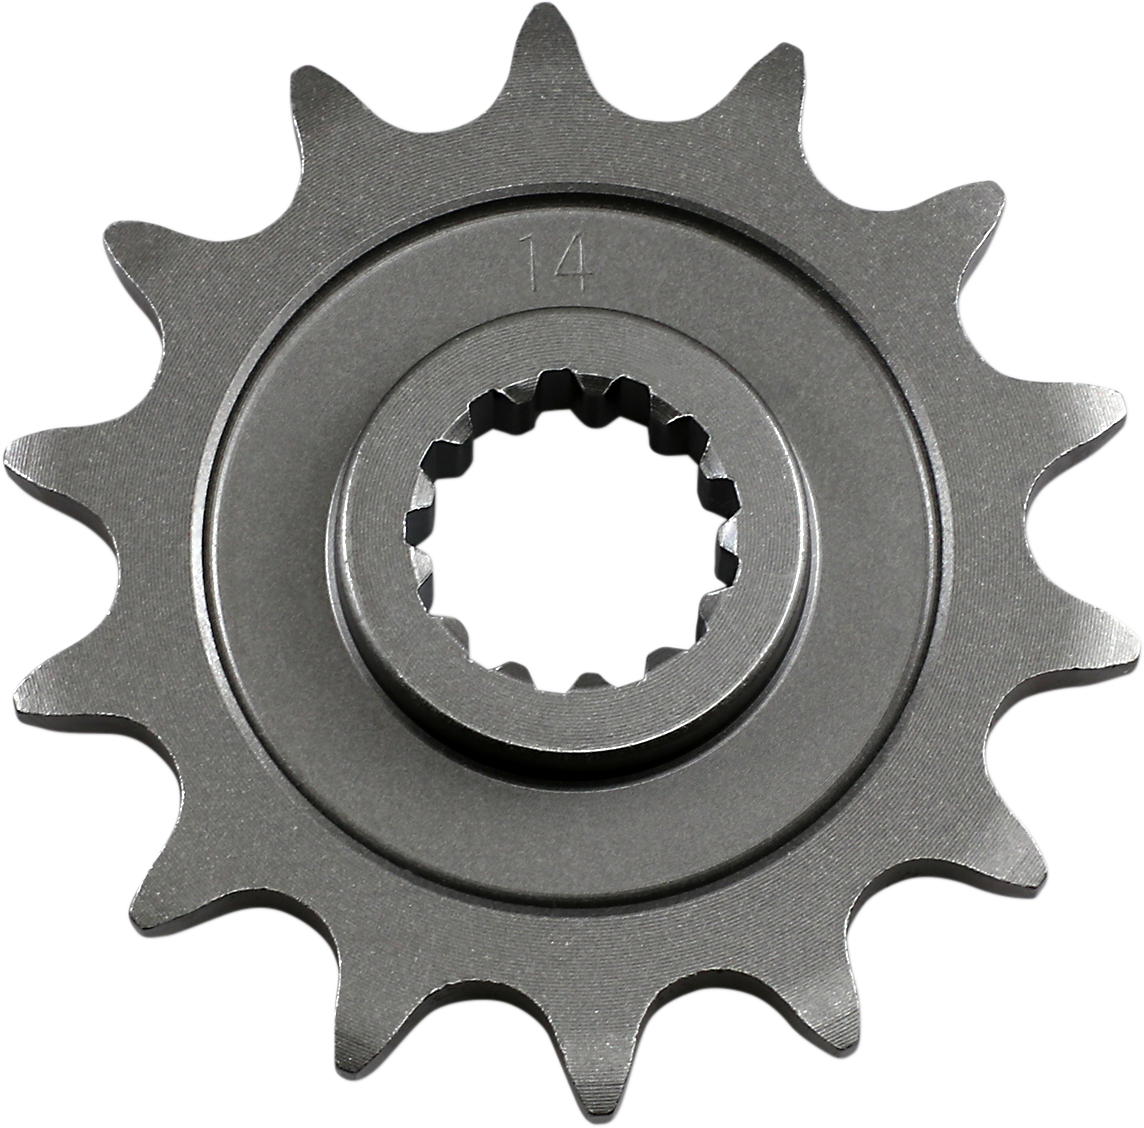 Parts Unlimited Counter Shaft Sprocket - 14-Tooth 27511-14300